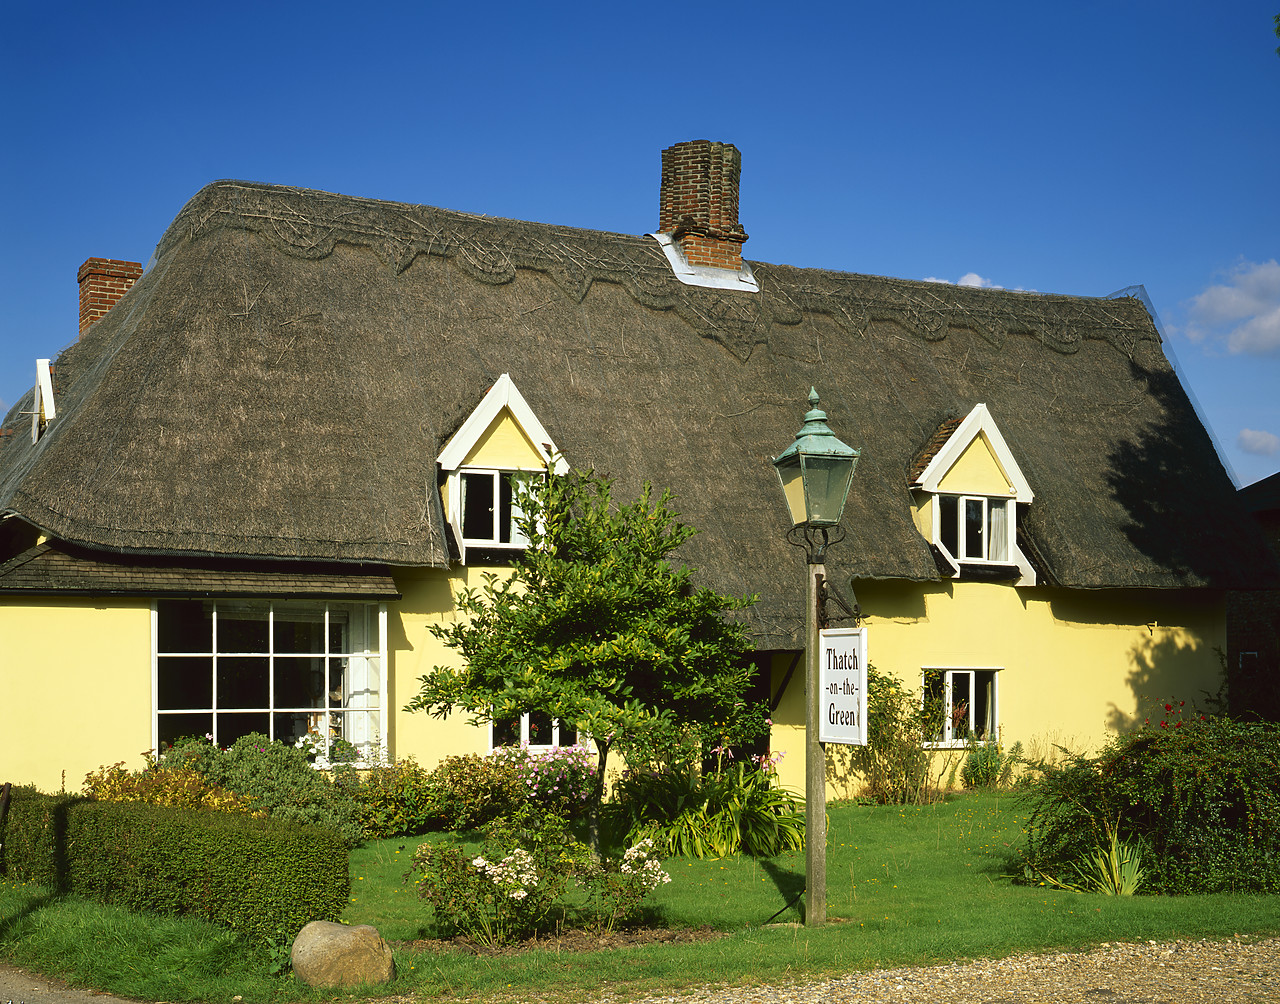 #010391-2 - Thatched Cottage, Cockfield, Suffolk, England